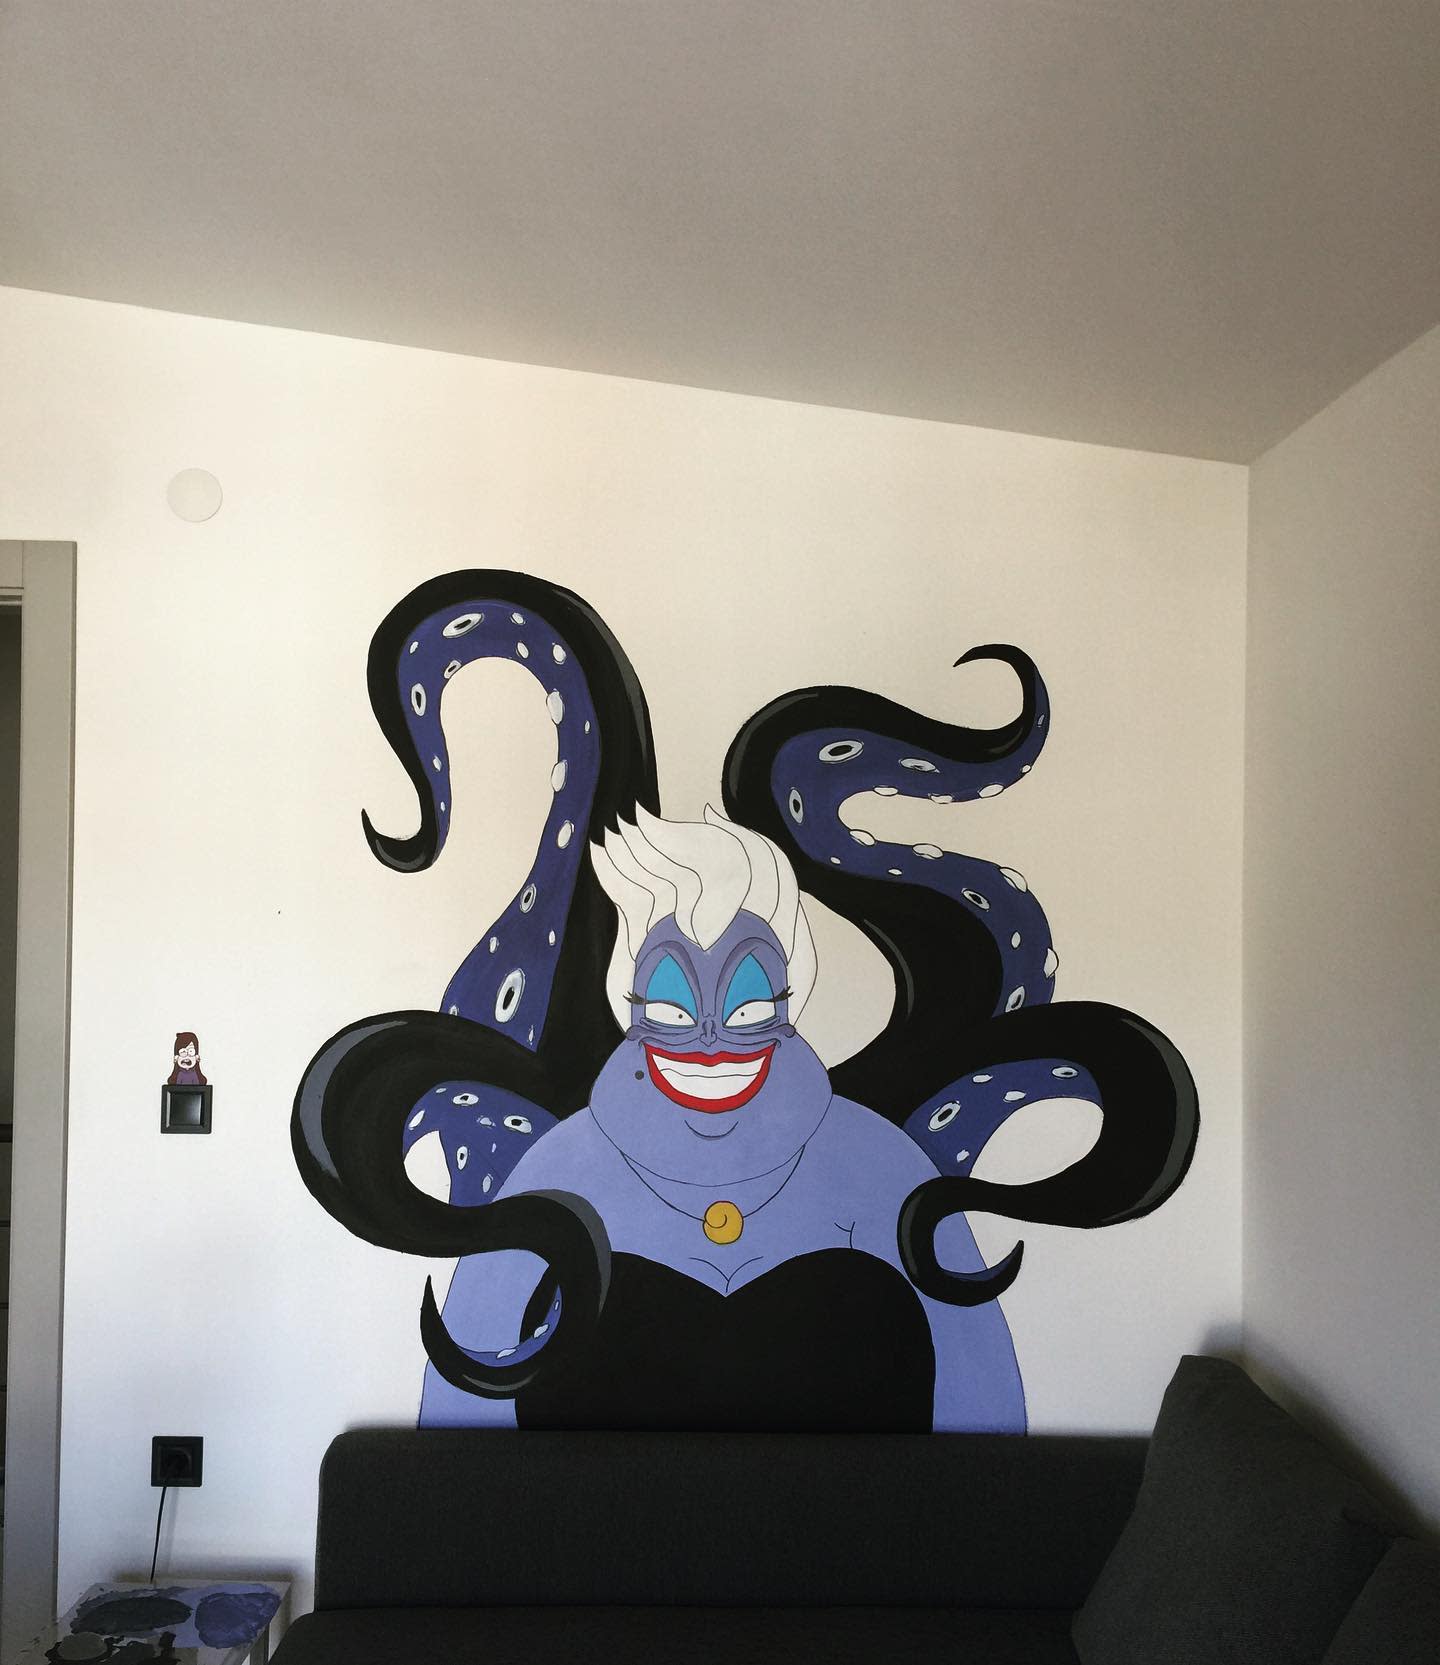 ursula from the little mermaid painted on wall 